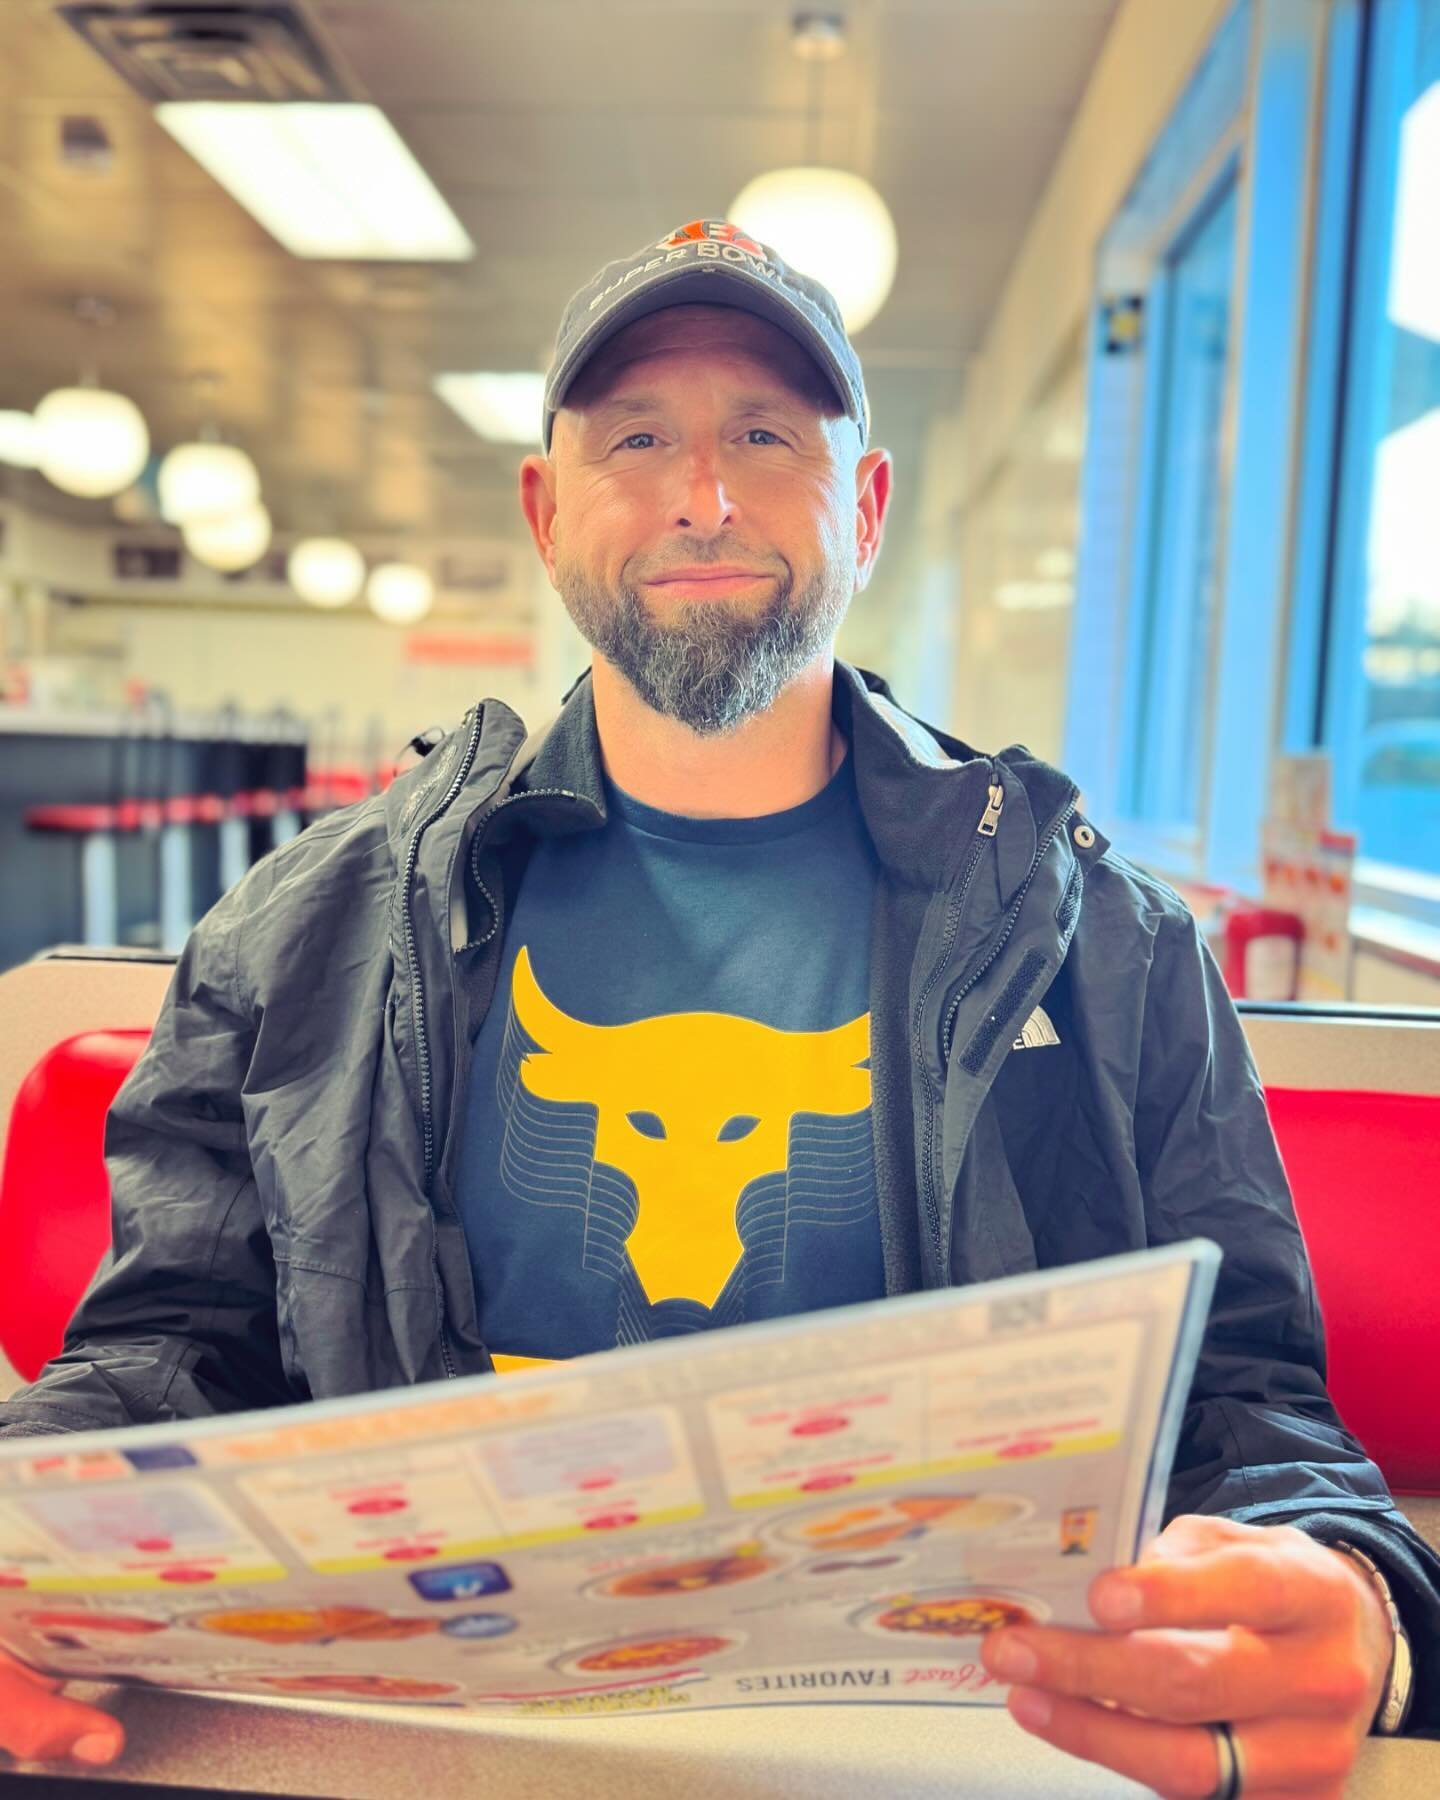 My oldest (and arguably most famous) friend treated me to Waffle House.